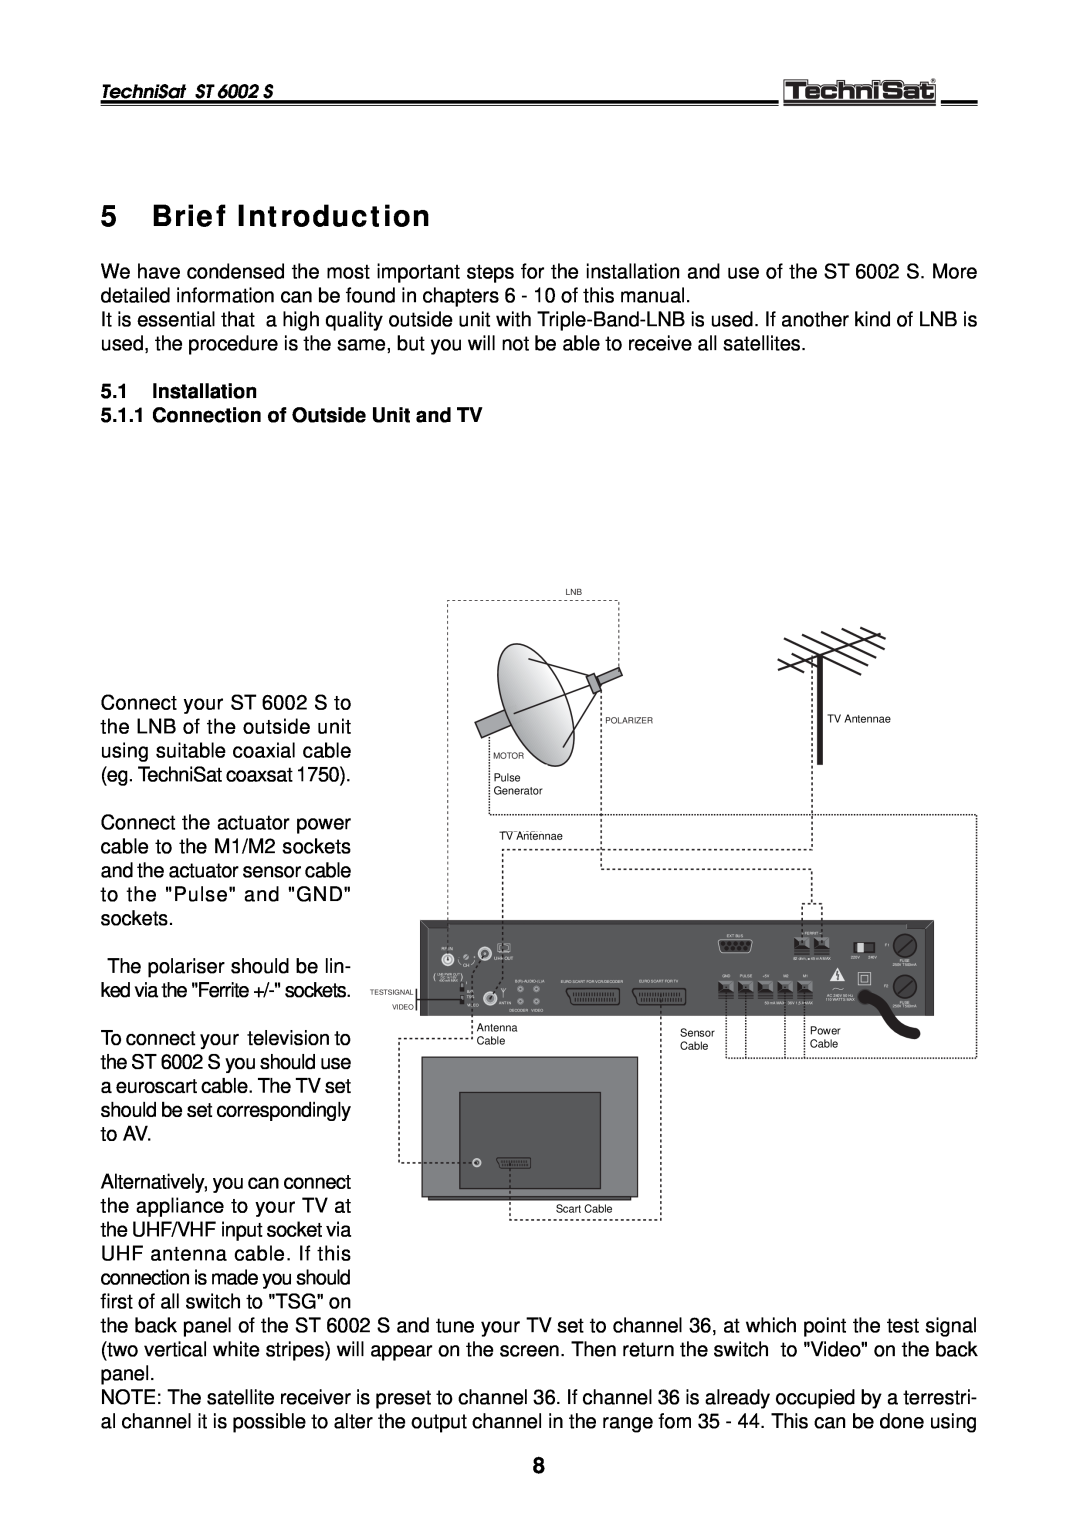 TechniSat ST 6002 S manual Brief Introduction, 5.1Installation, Connection of Outside Unit and TV 